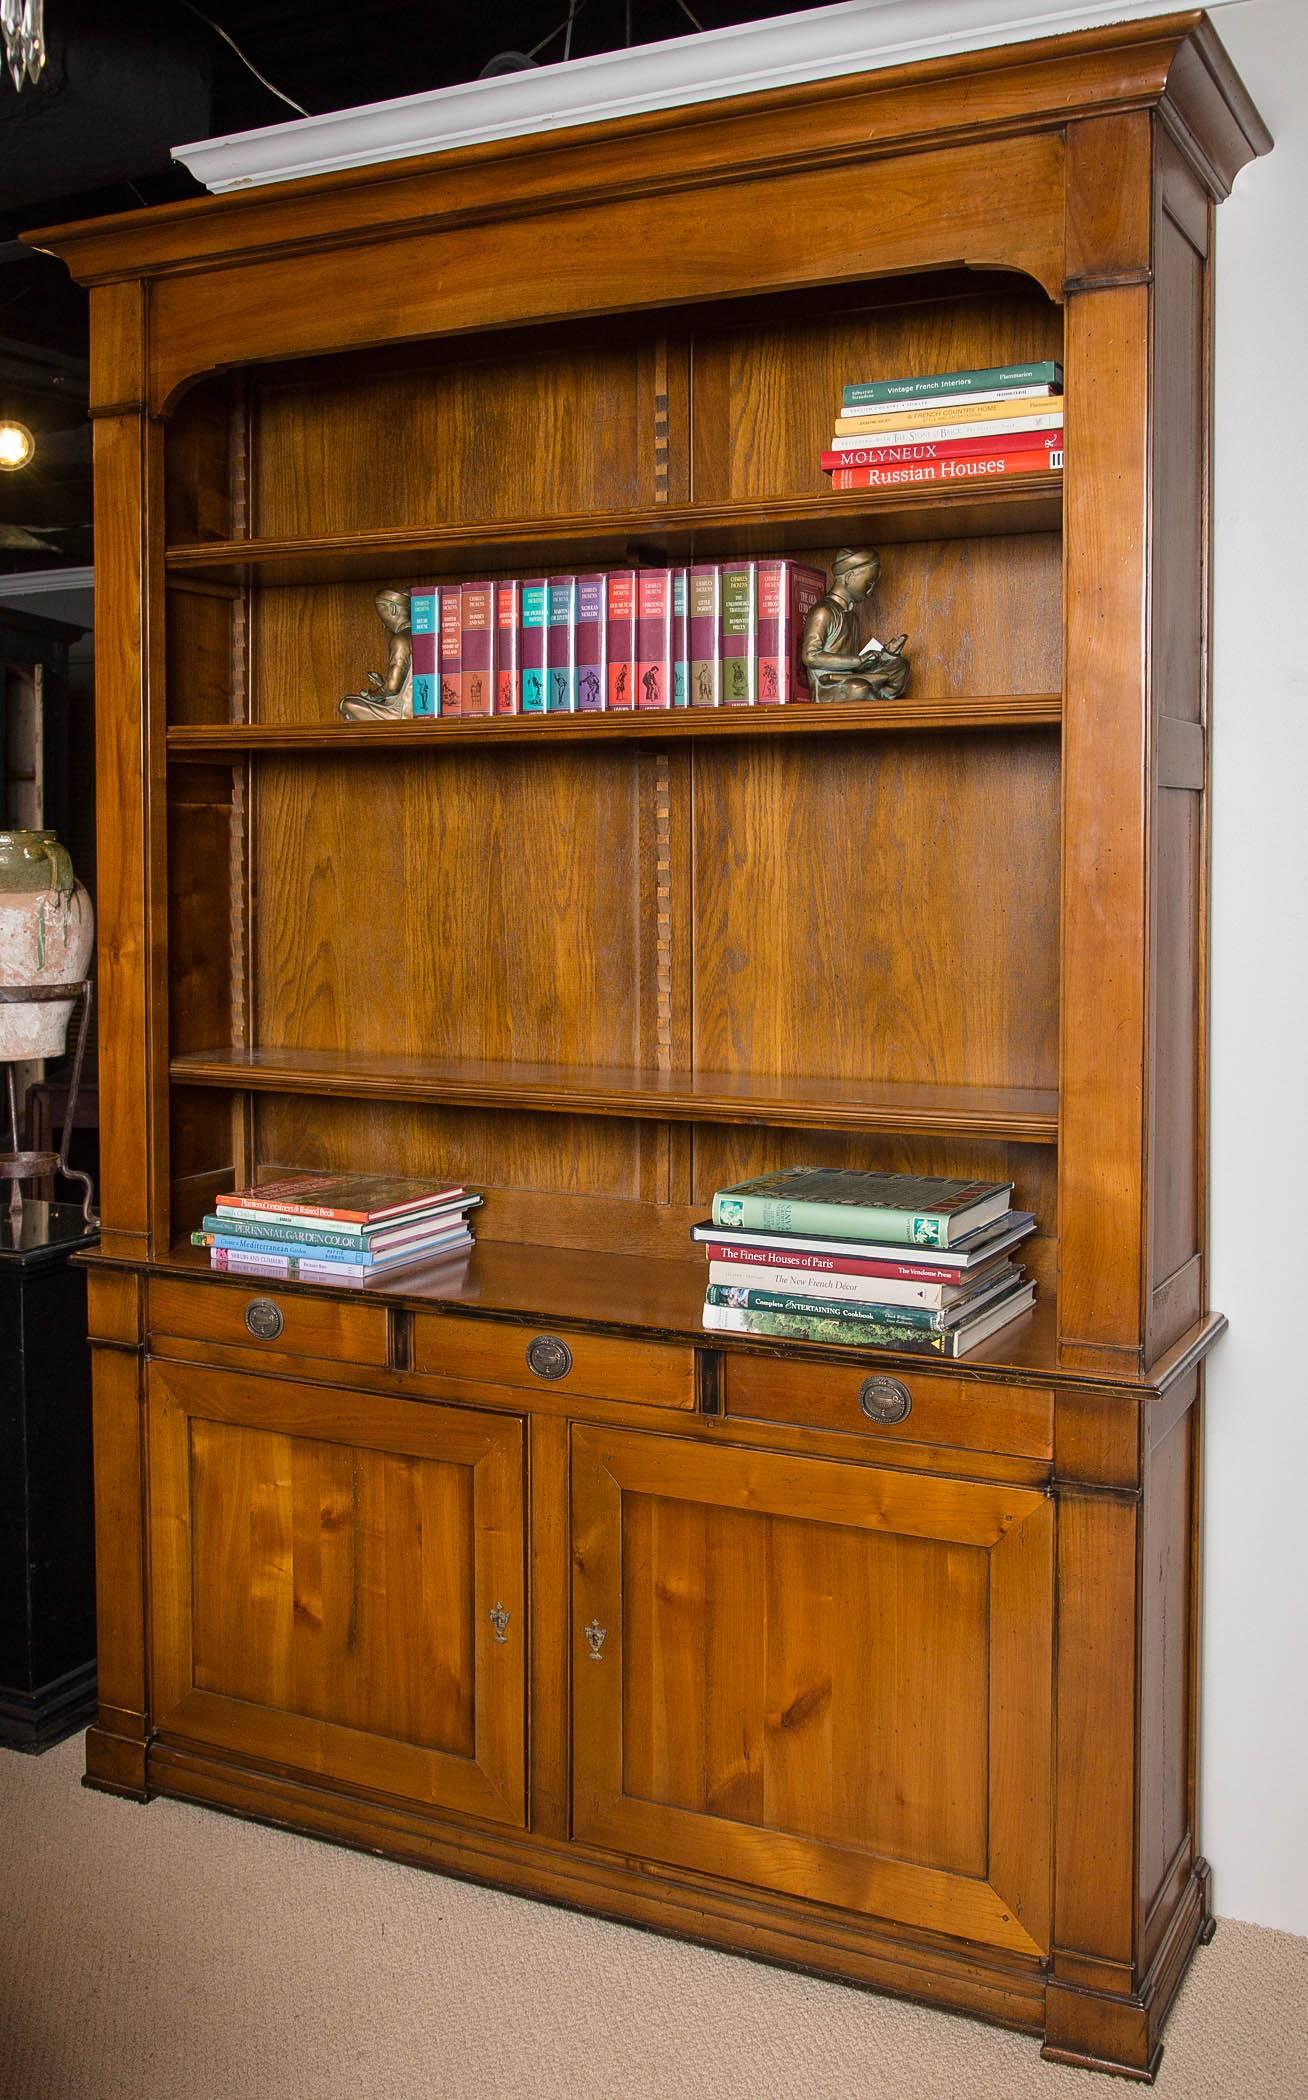 French biblioteque or bookcase made from aged cheerywood by DeBournais in Champigny-Sur-Verde, France. This piece is #13 of 30 made for clients in the USA.
Adjustable shelves and lockable cabinets.